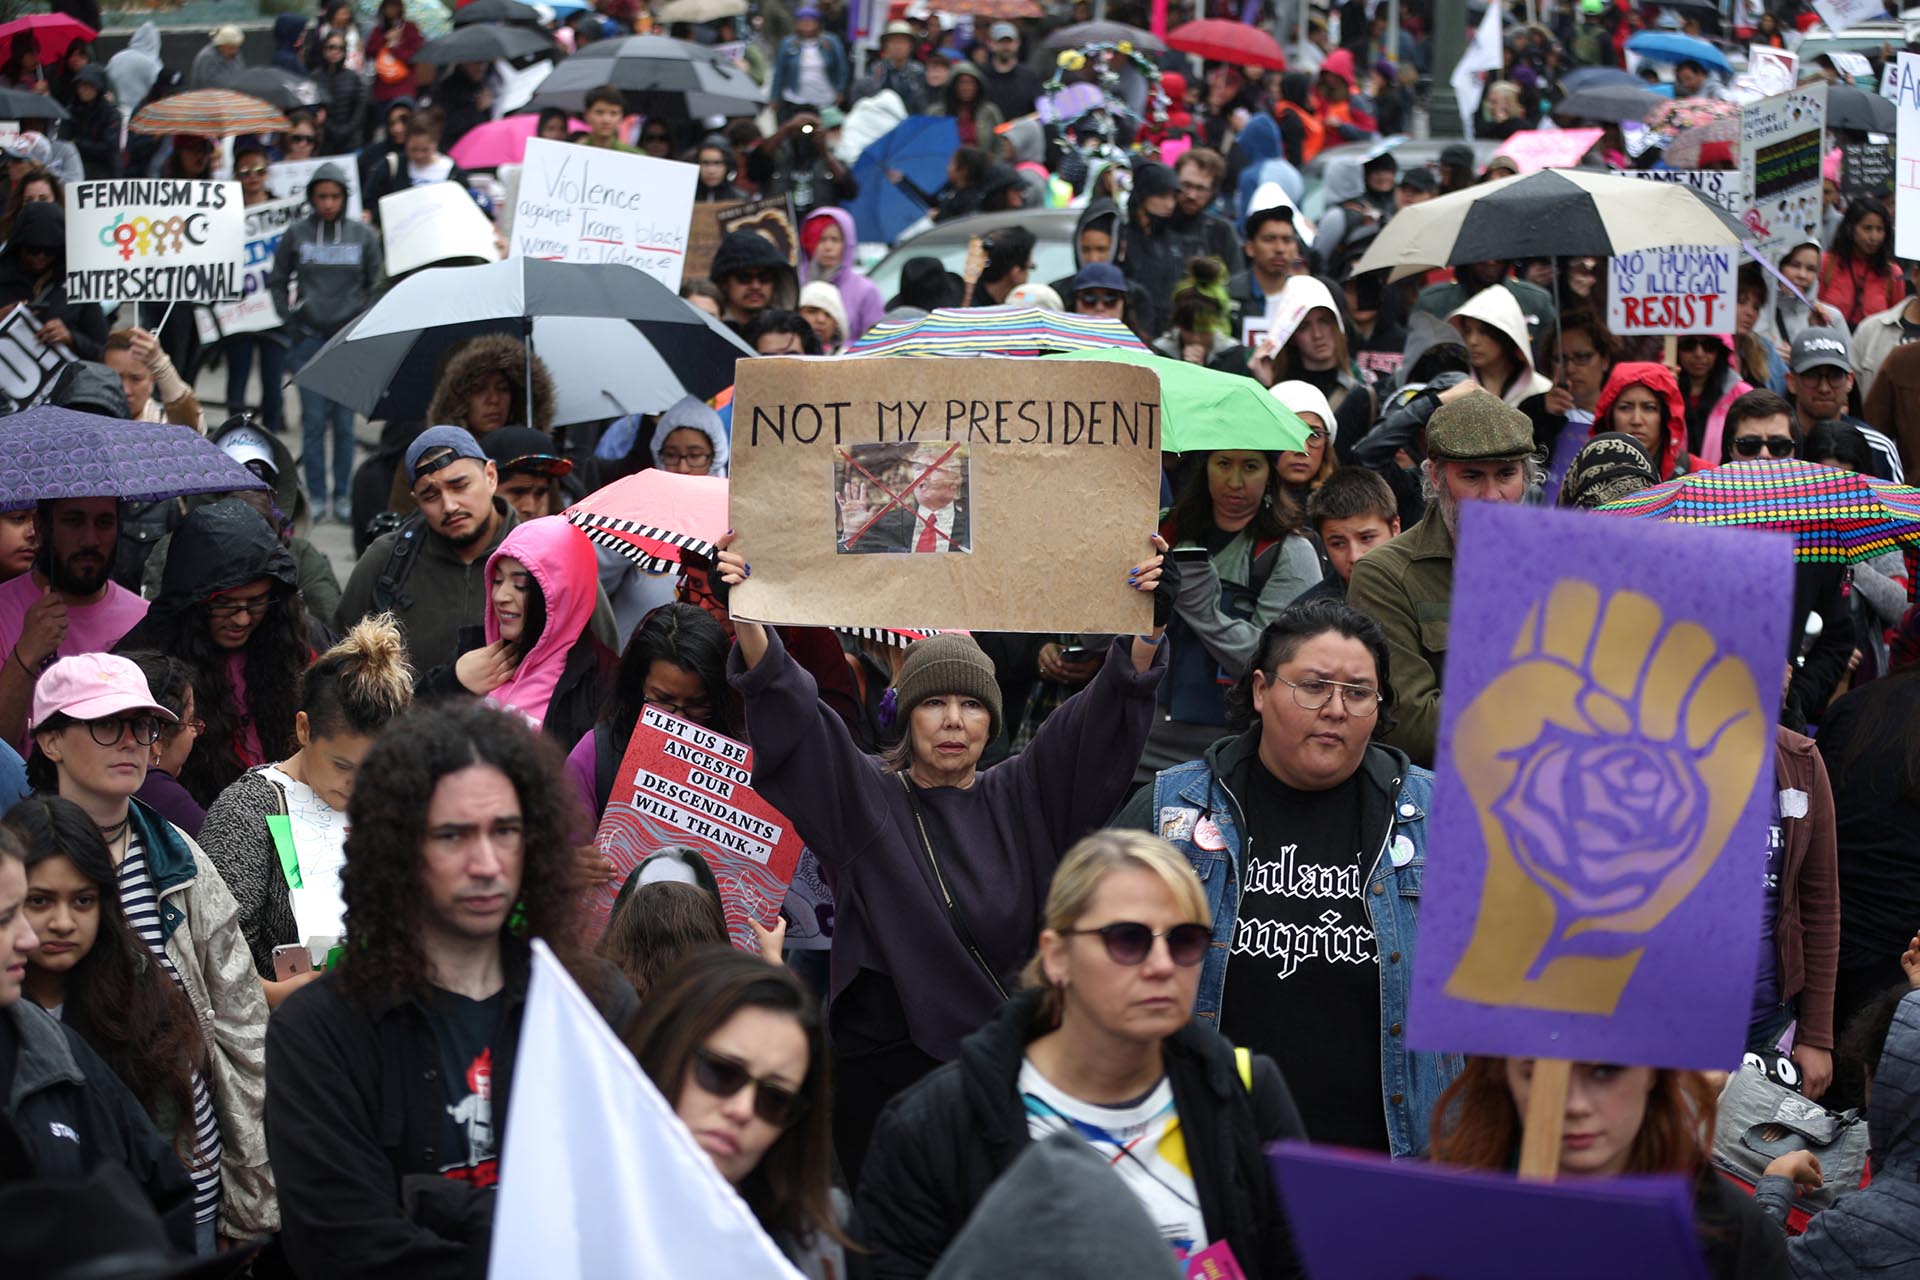 People listen to speakers in the rain at a rally for International Women's Day in Los Angeles, California, U.S., March 5, 2017. REUTERS/Lucy Nicholson